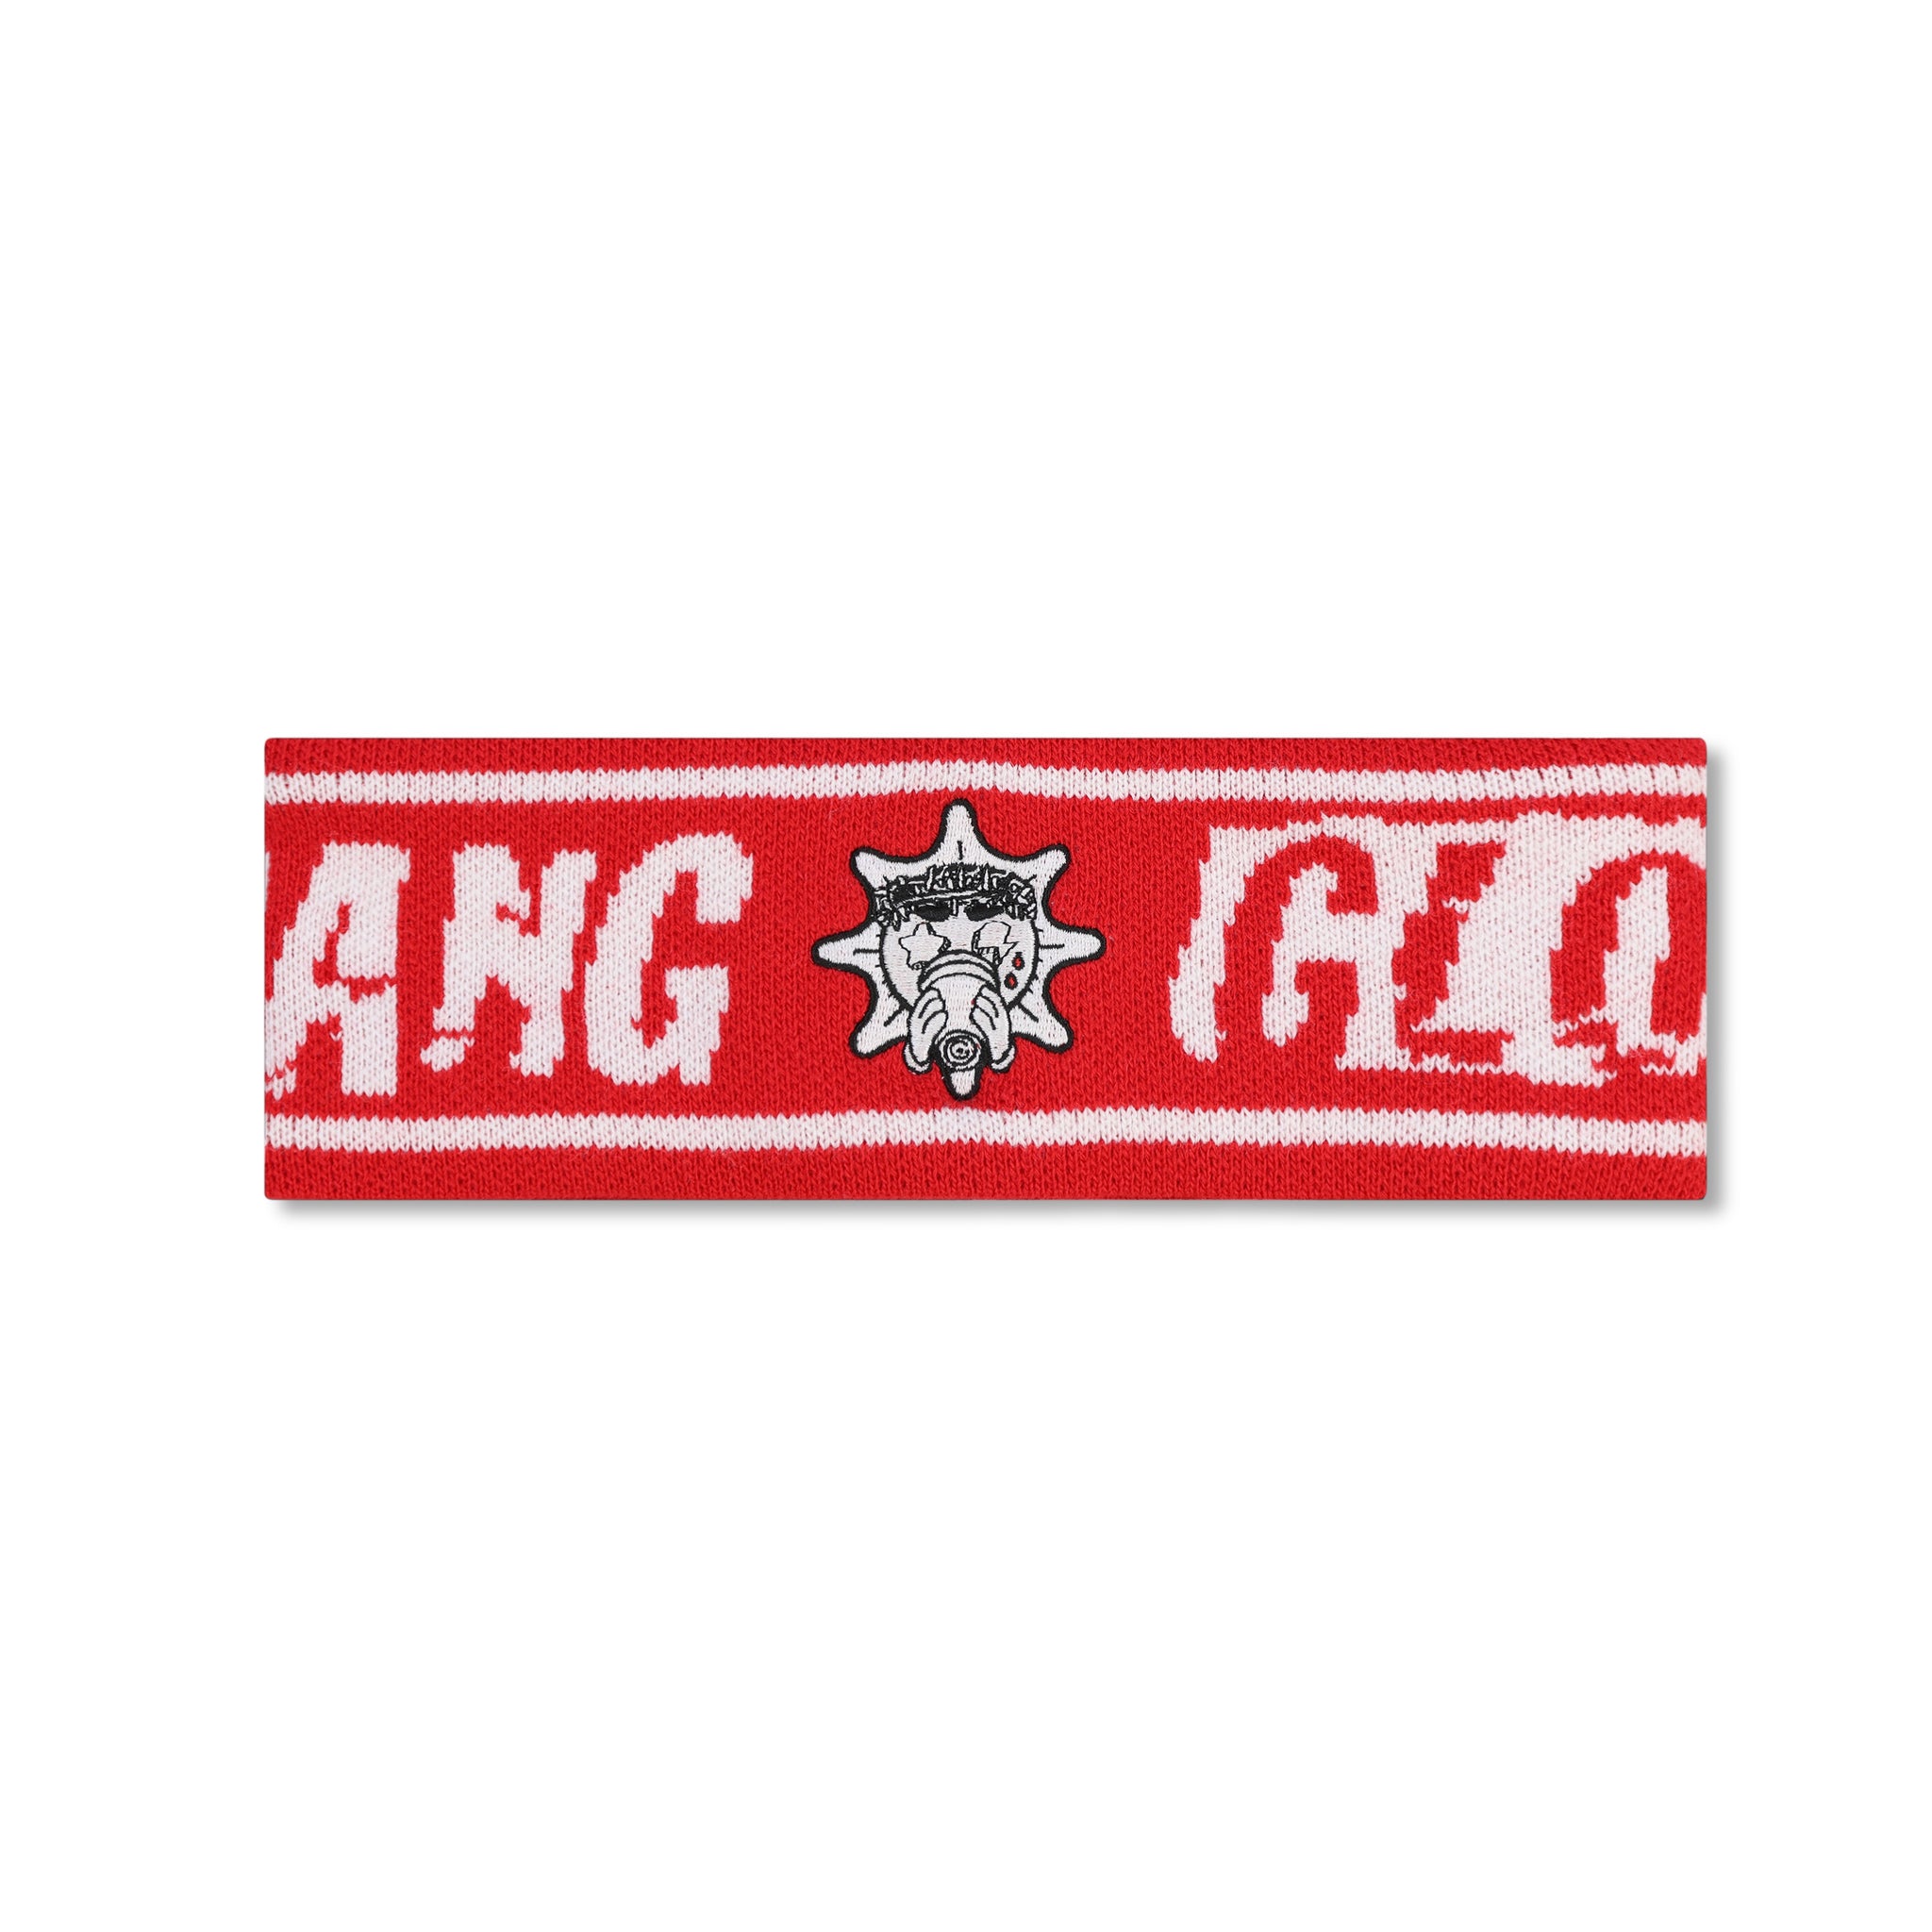 Glo Gang Almighty Headband (Red/White)